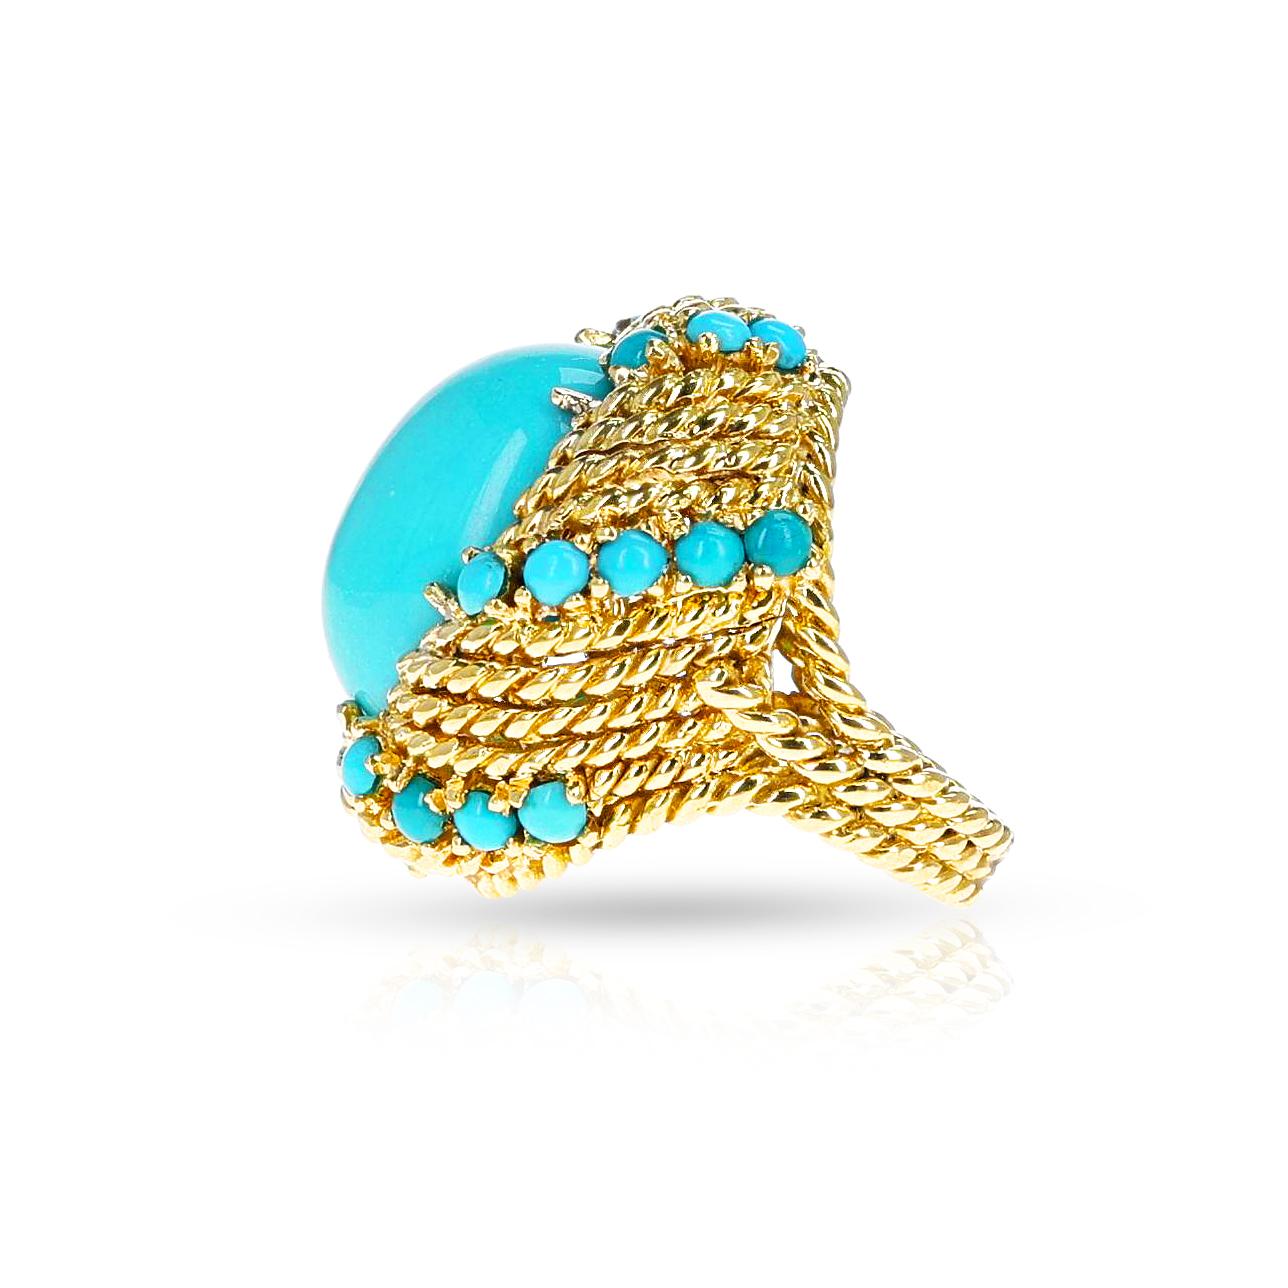 Turquoise Cabochon Cocktail Ring with Rope-Work Gold, 18k In Excellent Condition For Sale In New York, NY